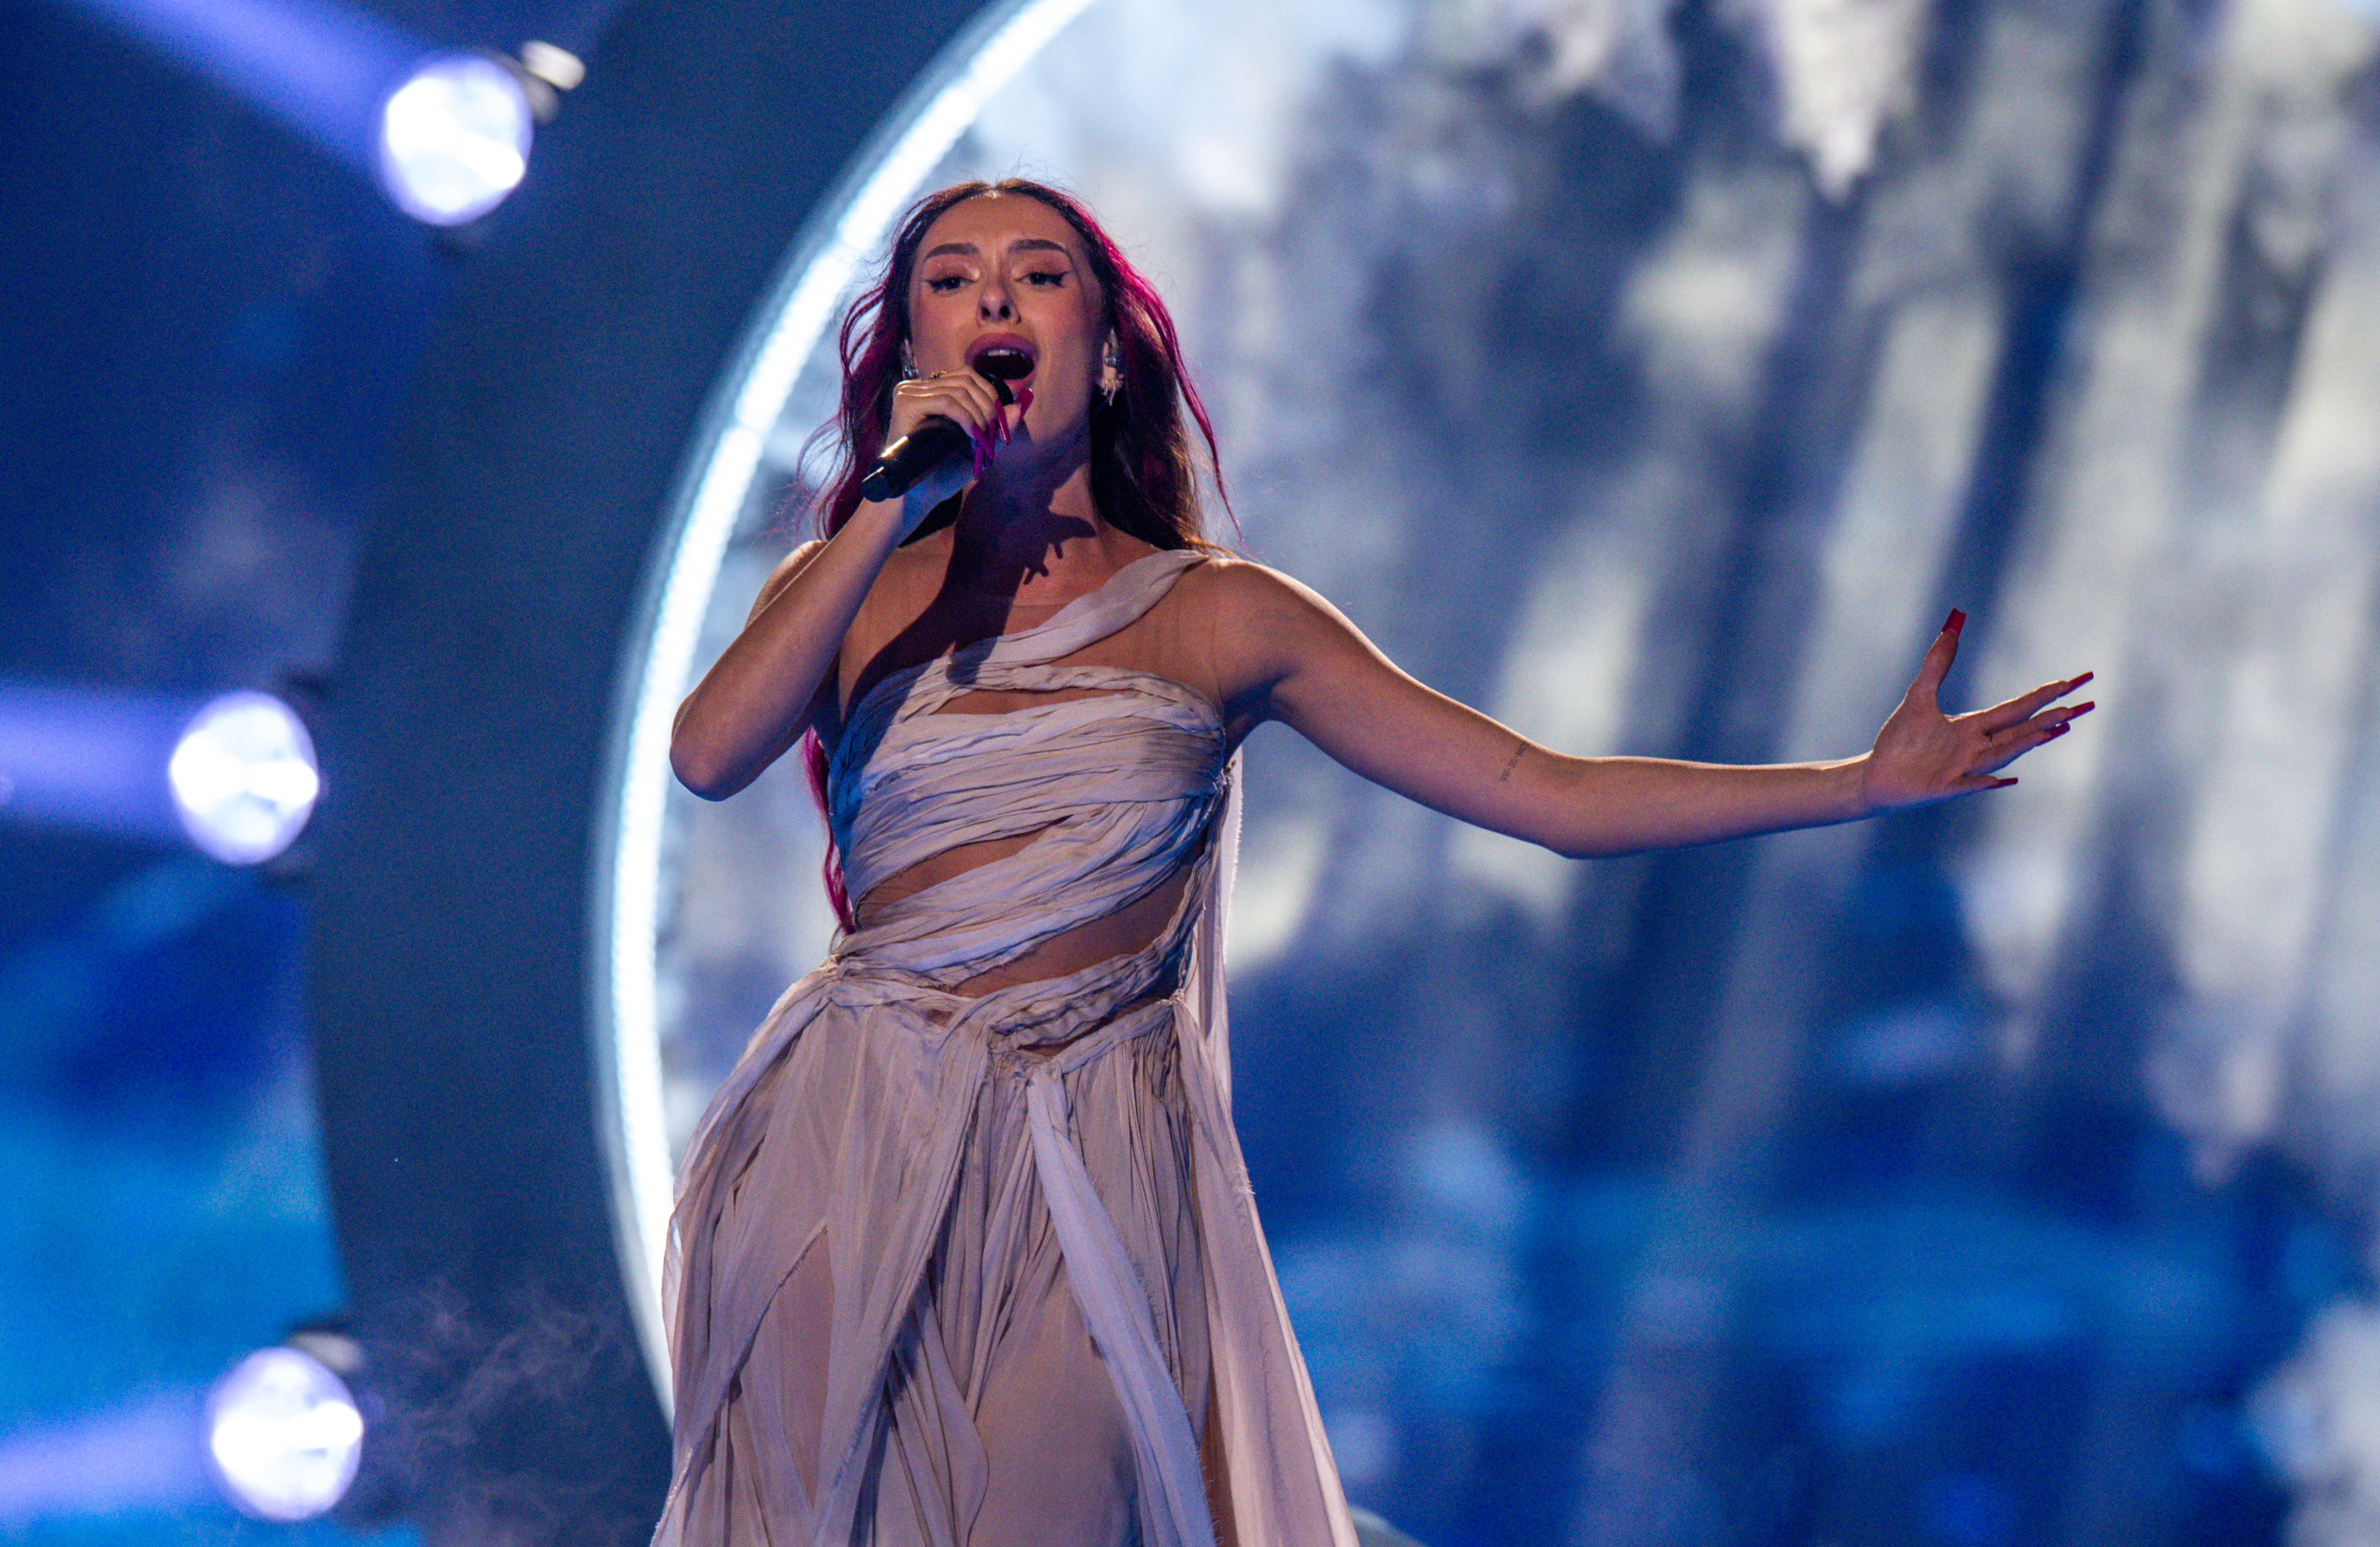 Eurovision star demands unauthorised video with Israel's Eden Golan is deleted